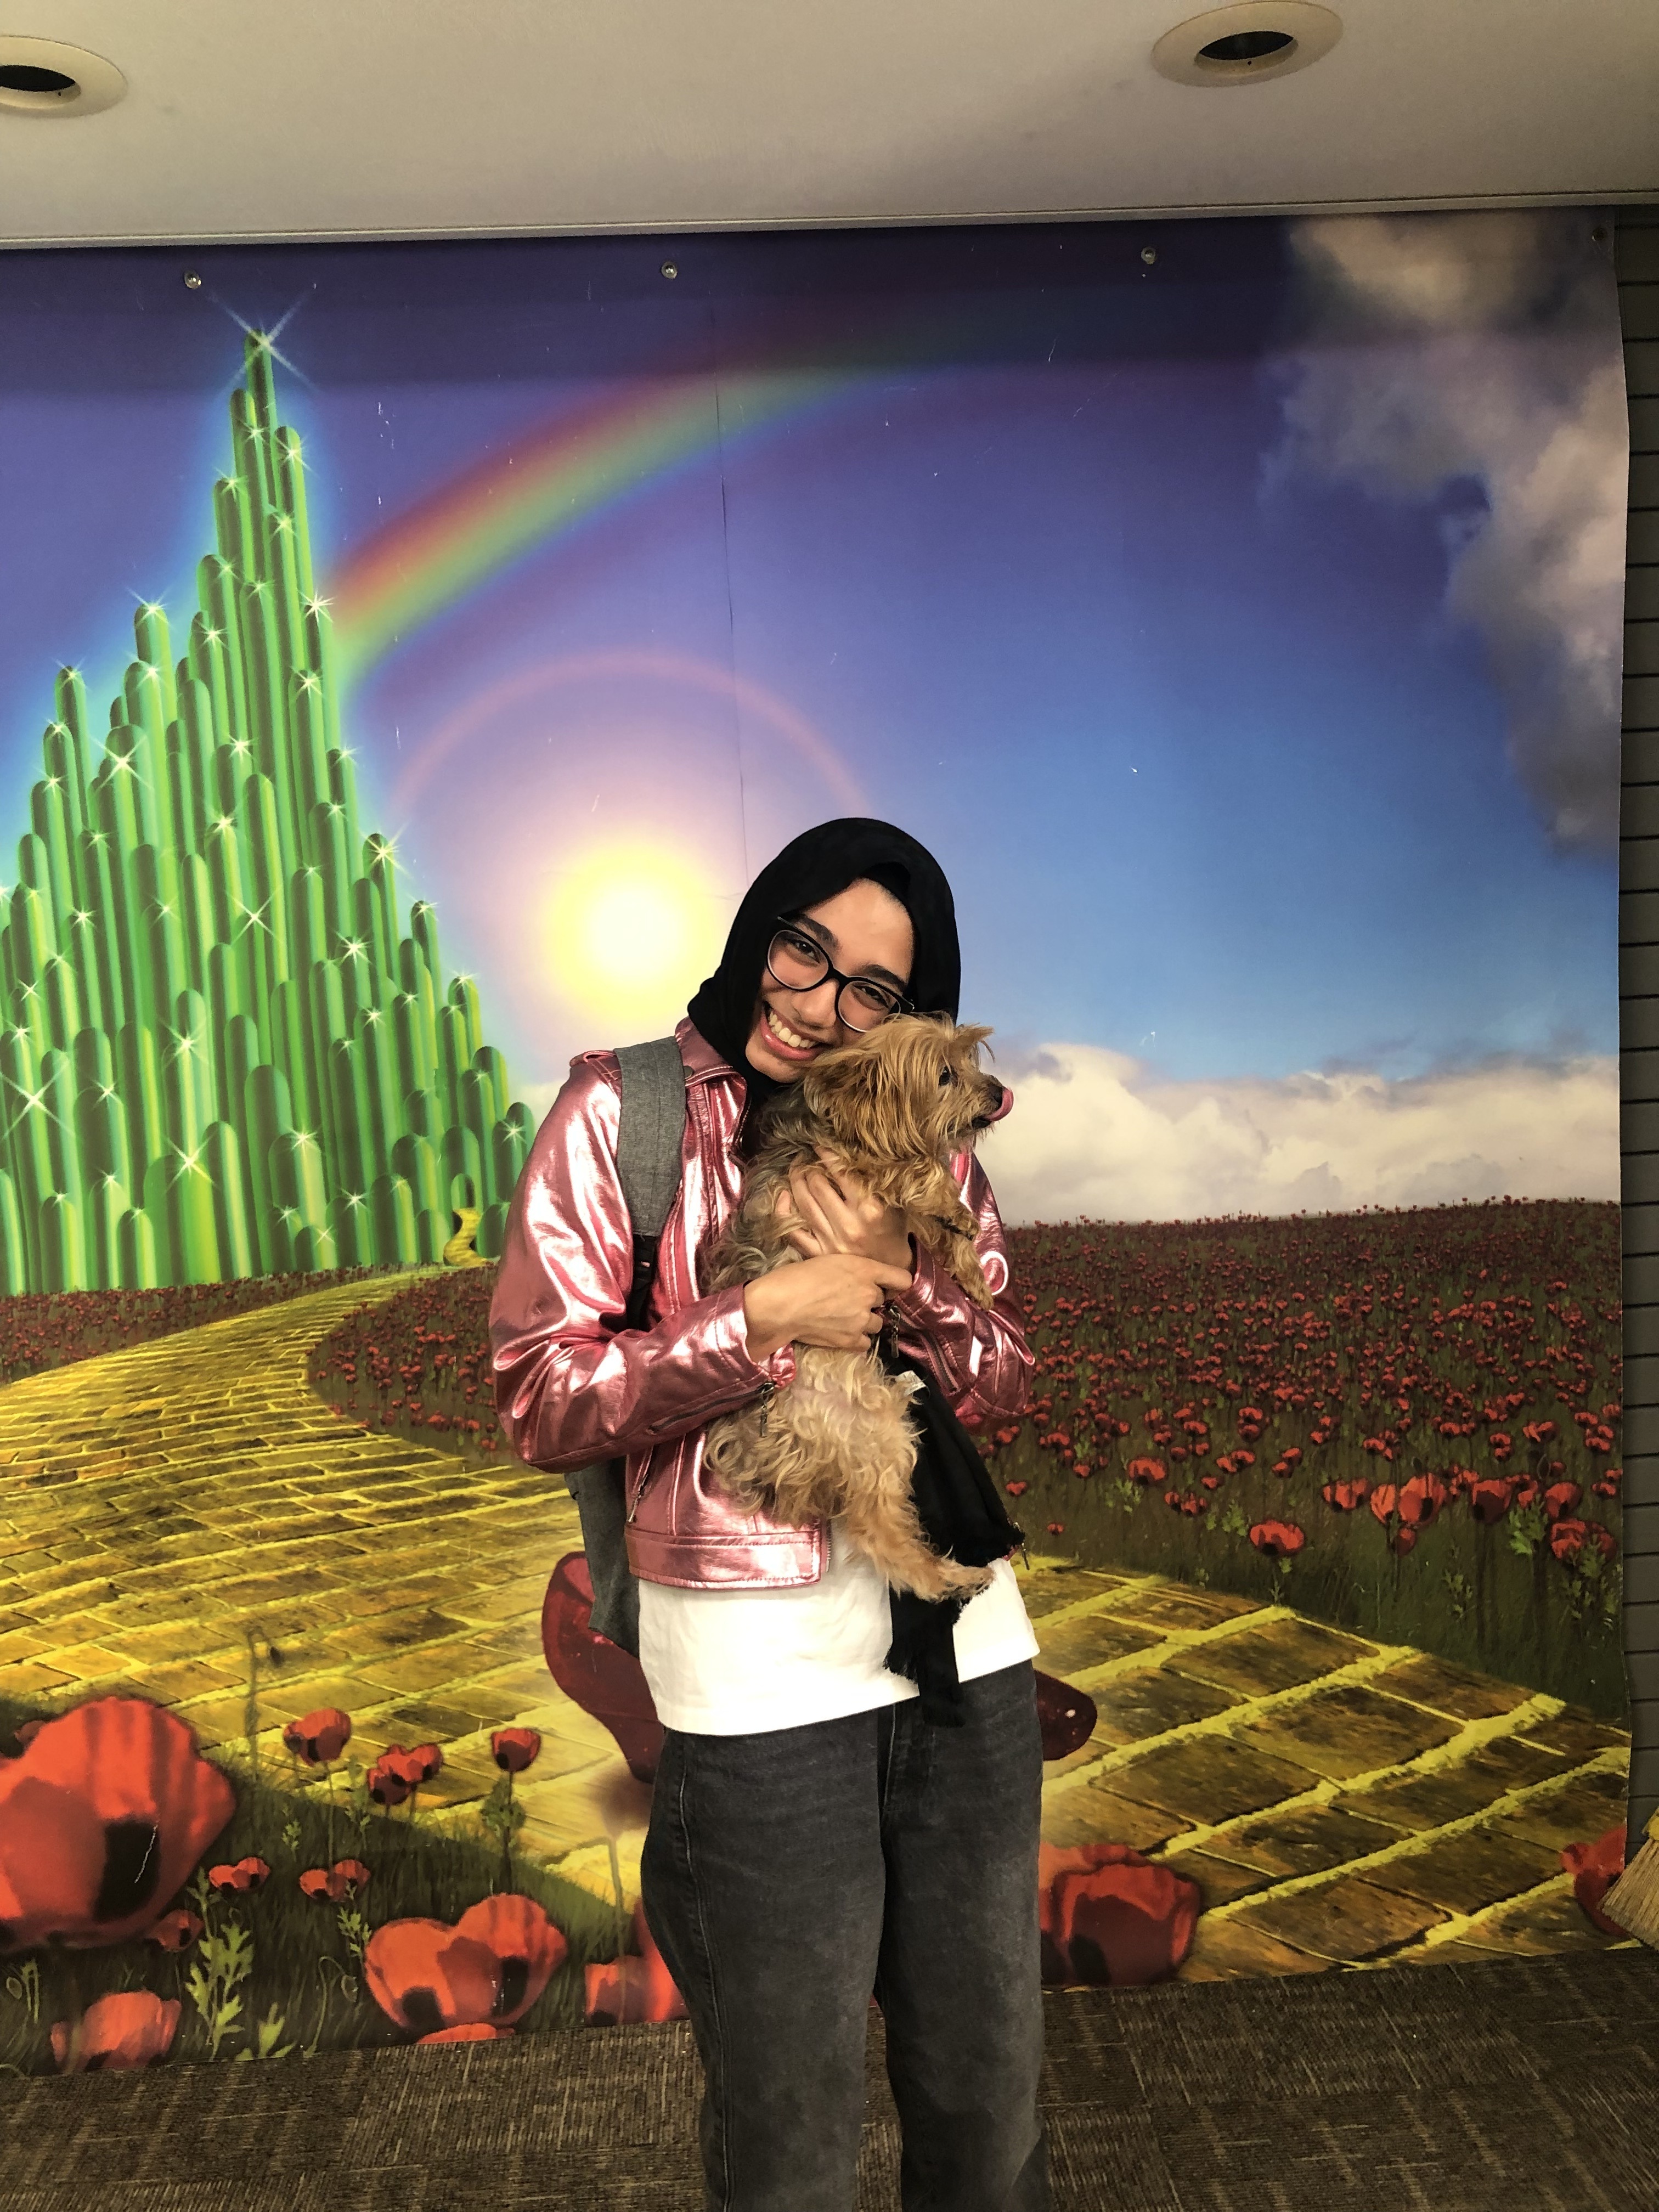 Sidrah holding a small brown dog in front of a backdrop from the Wizard of Oz